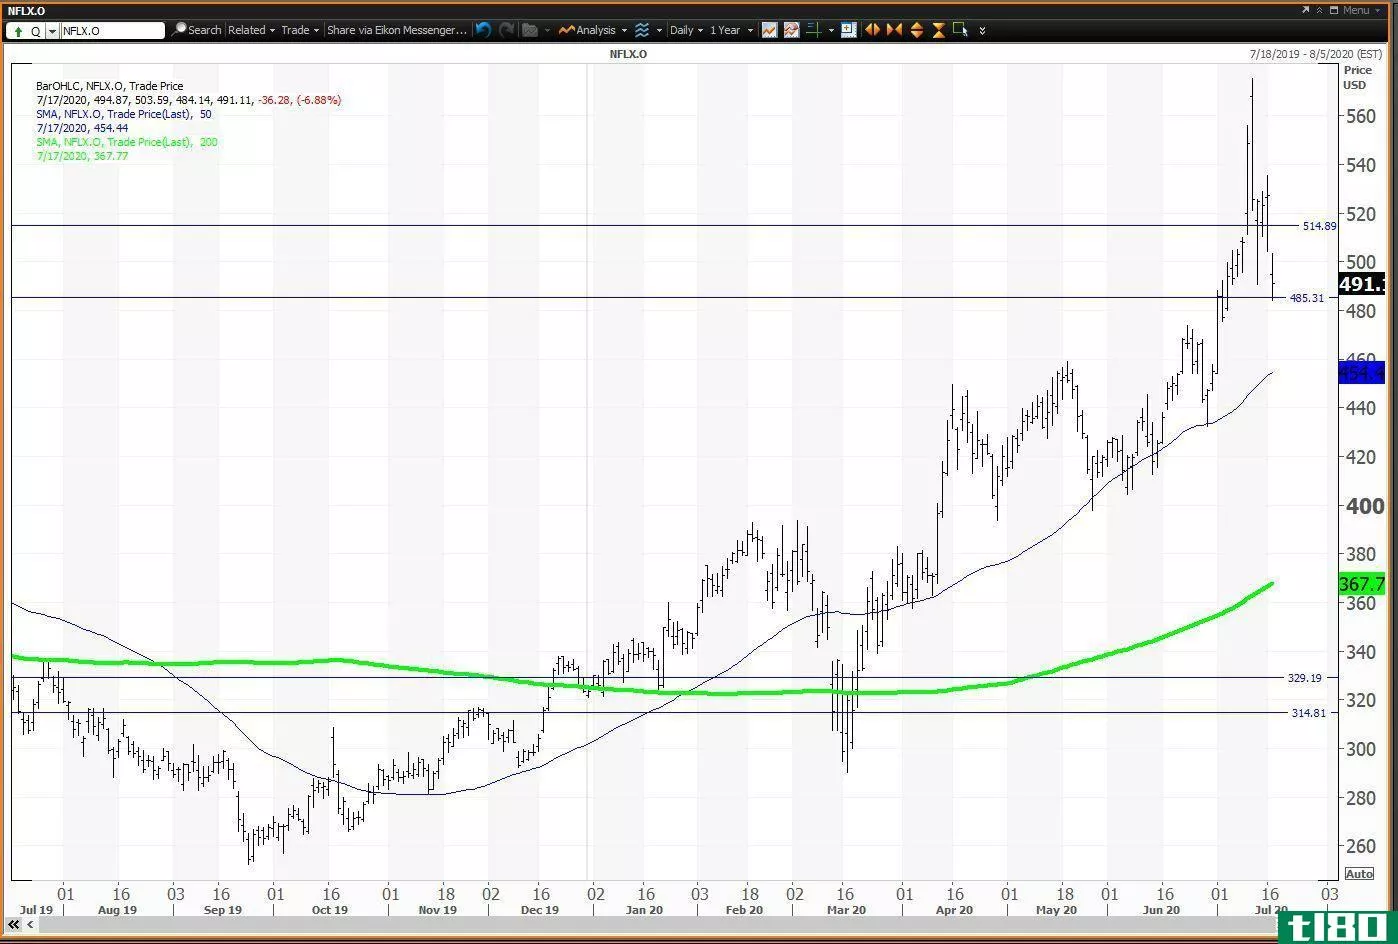 Daily chart showing the share price performance of Netflix, Inc. (NFLX)